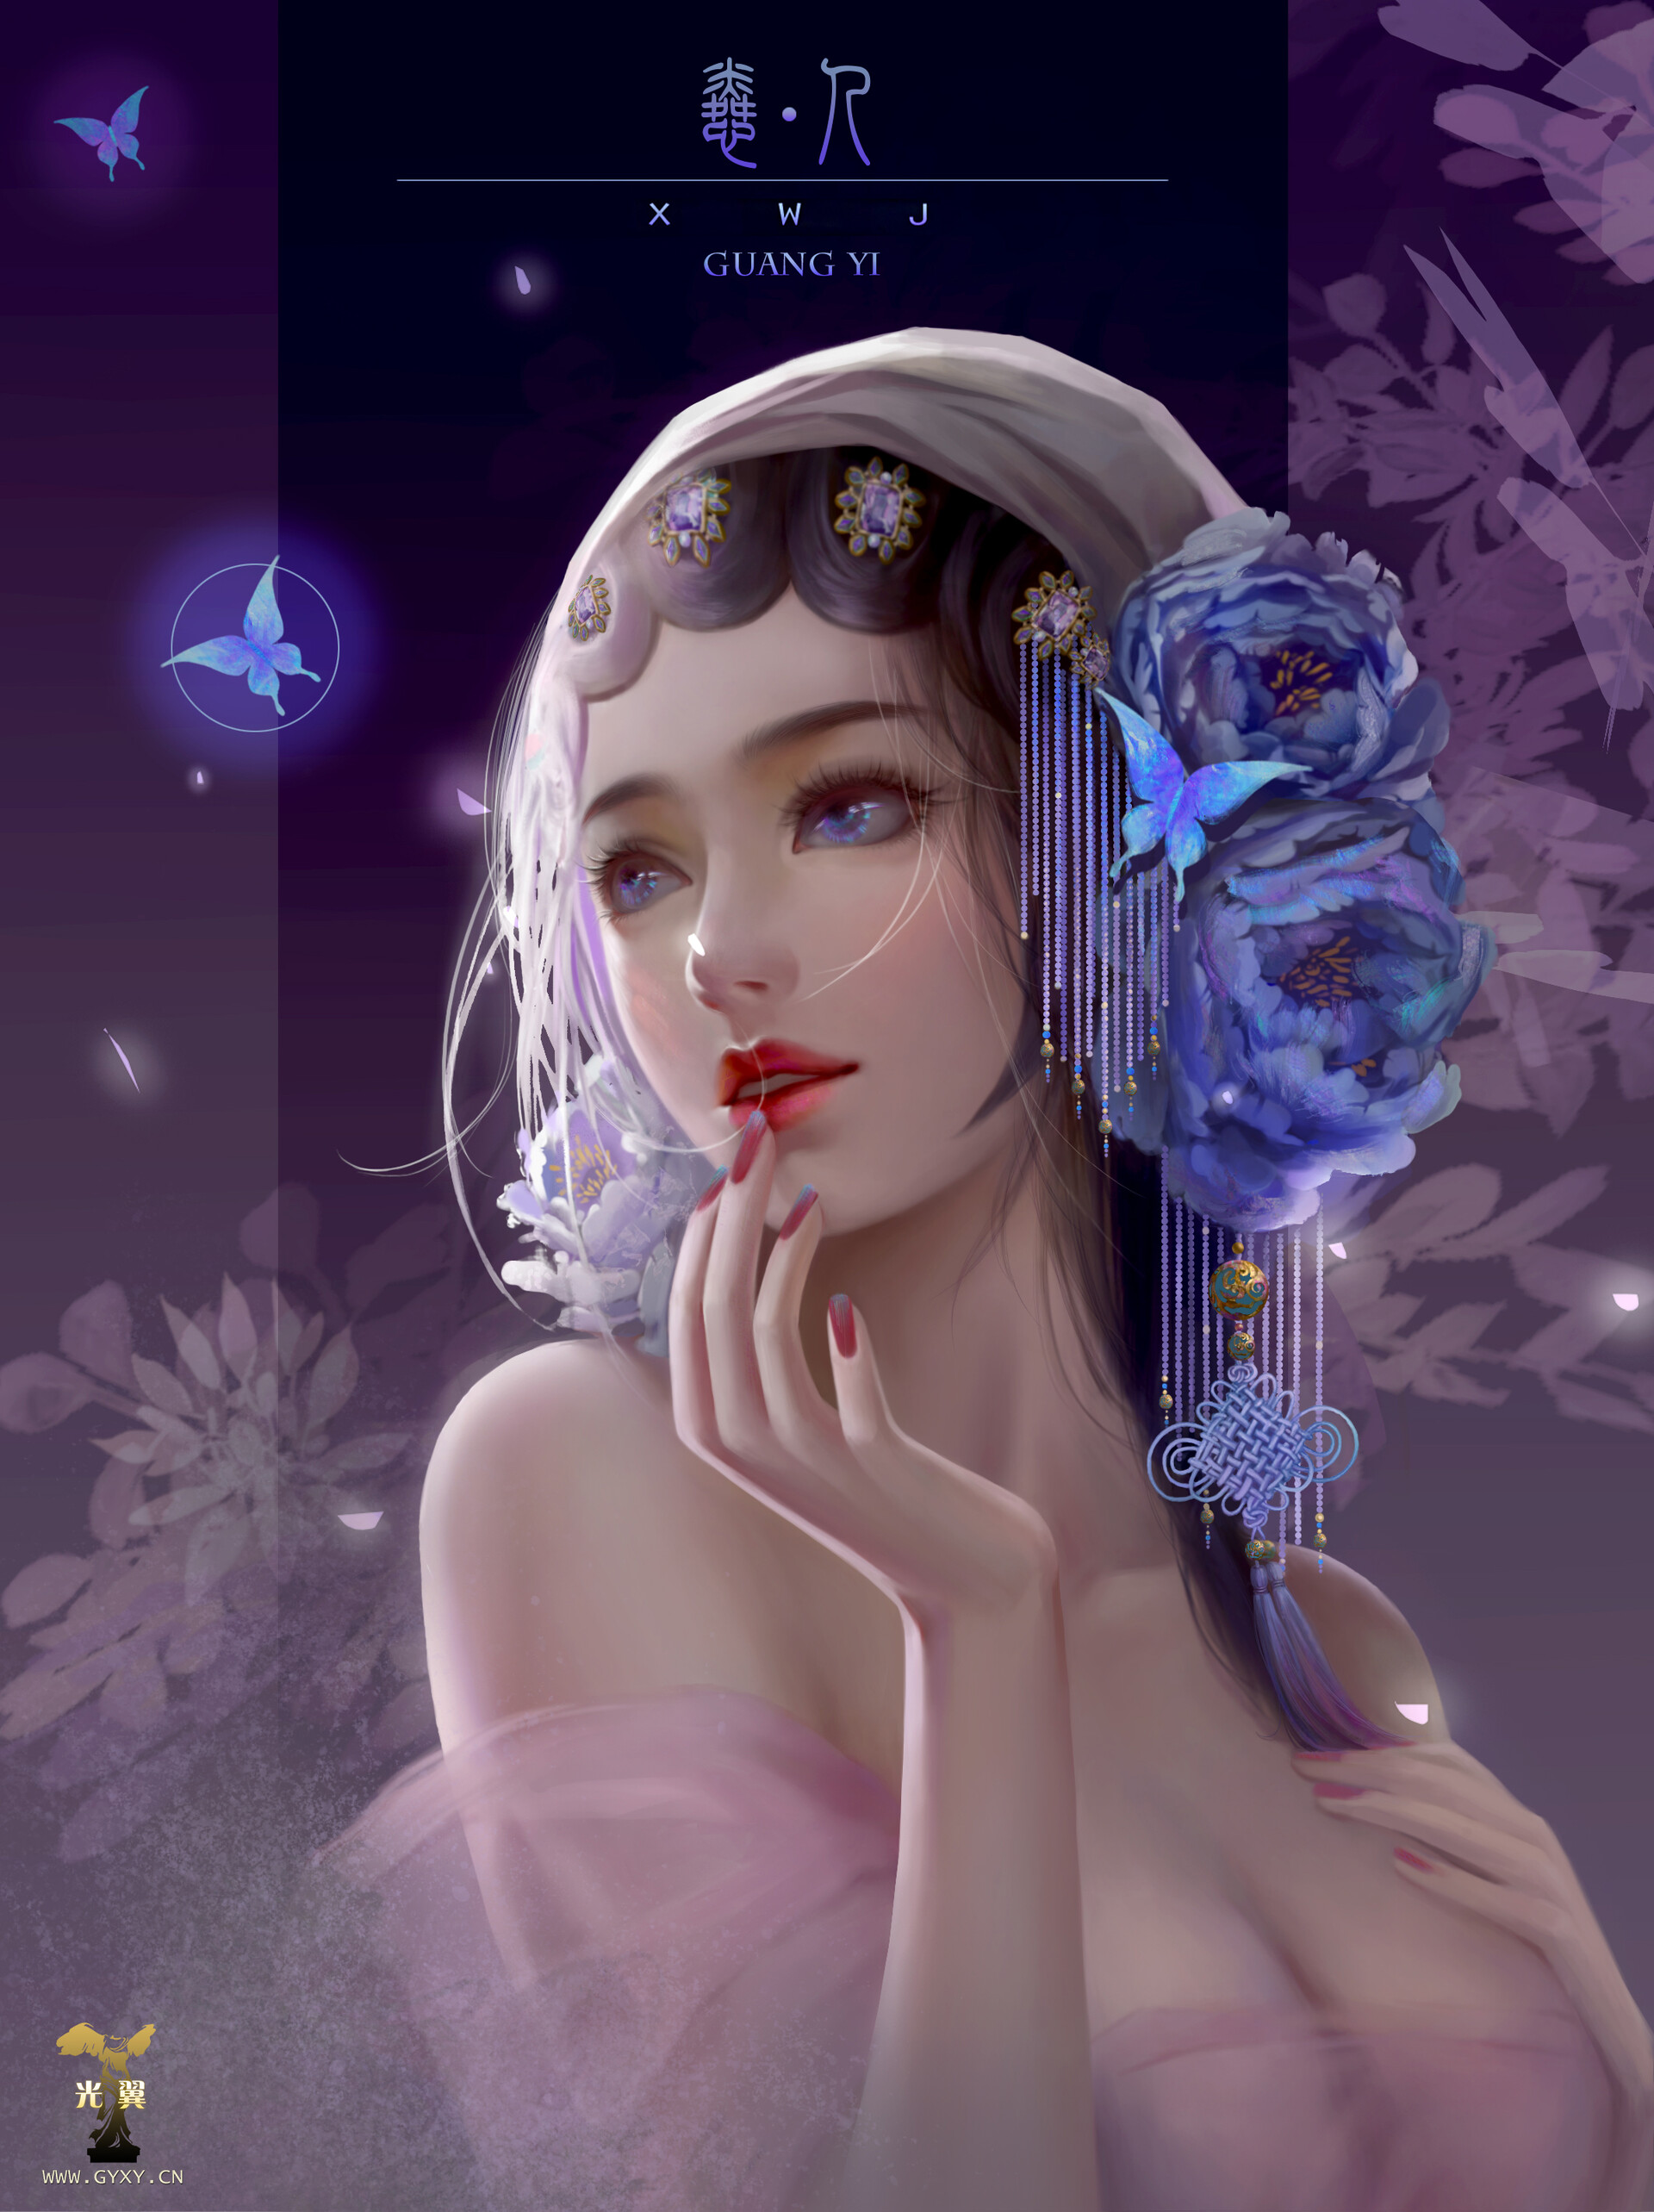 General 1920x2567 Lightwing Academy blue rose flower in hair flowers touching face caressing hands on boobs hand(s) on chest women rose hair accessories digital art looking away portrait display drawing cleavage artwork open mouth butterfly white rose ArtStation